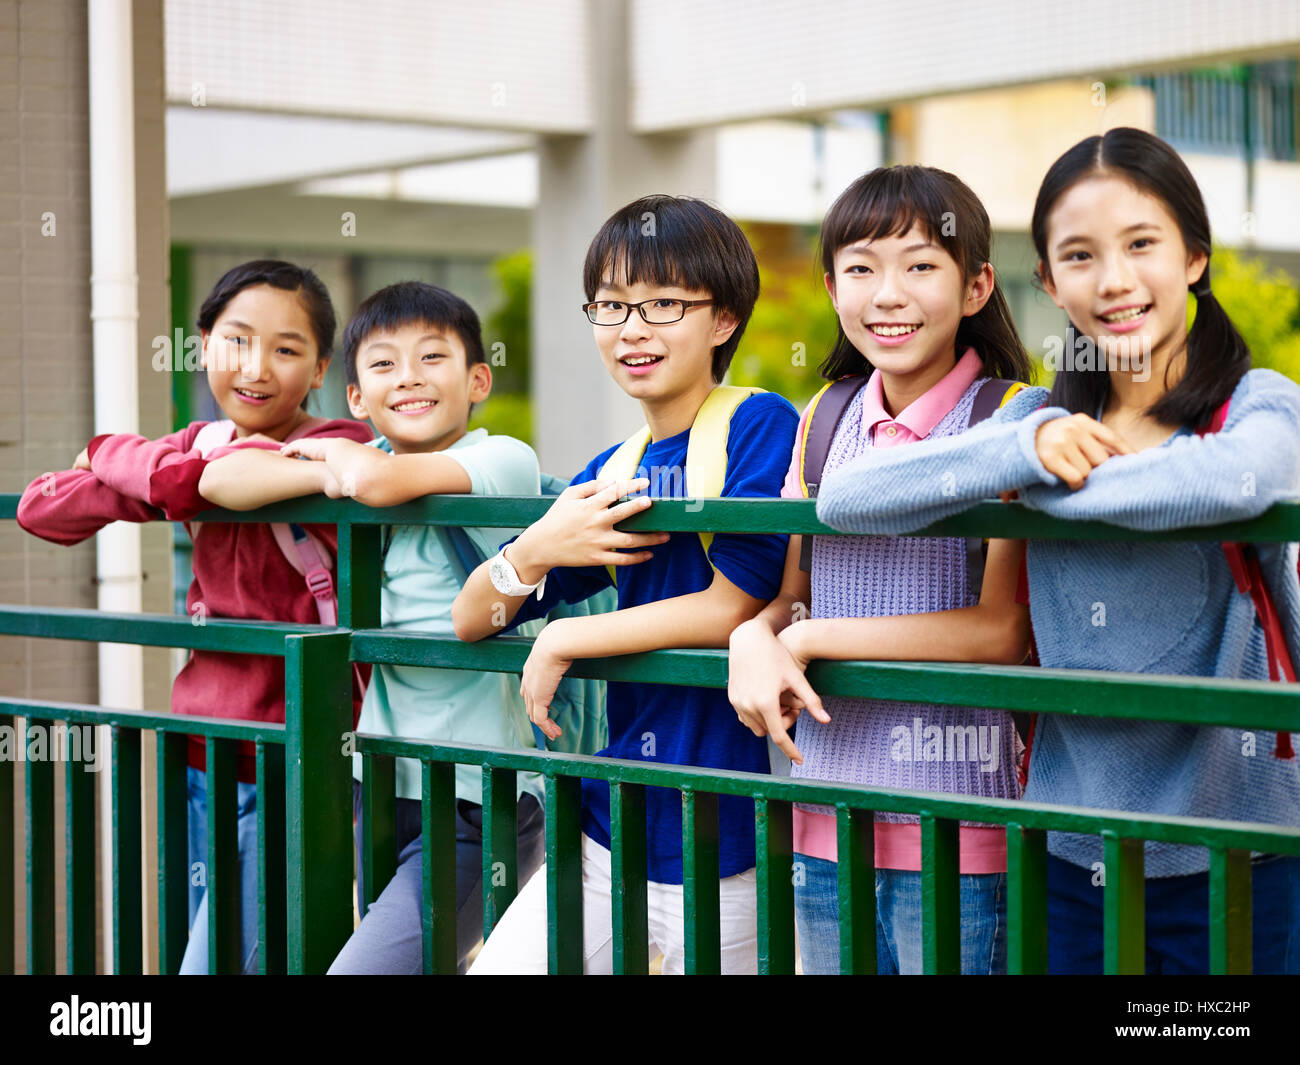 portrait of a group of happy and smiling elementary school students. Stock Photo